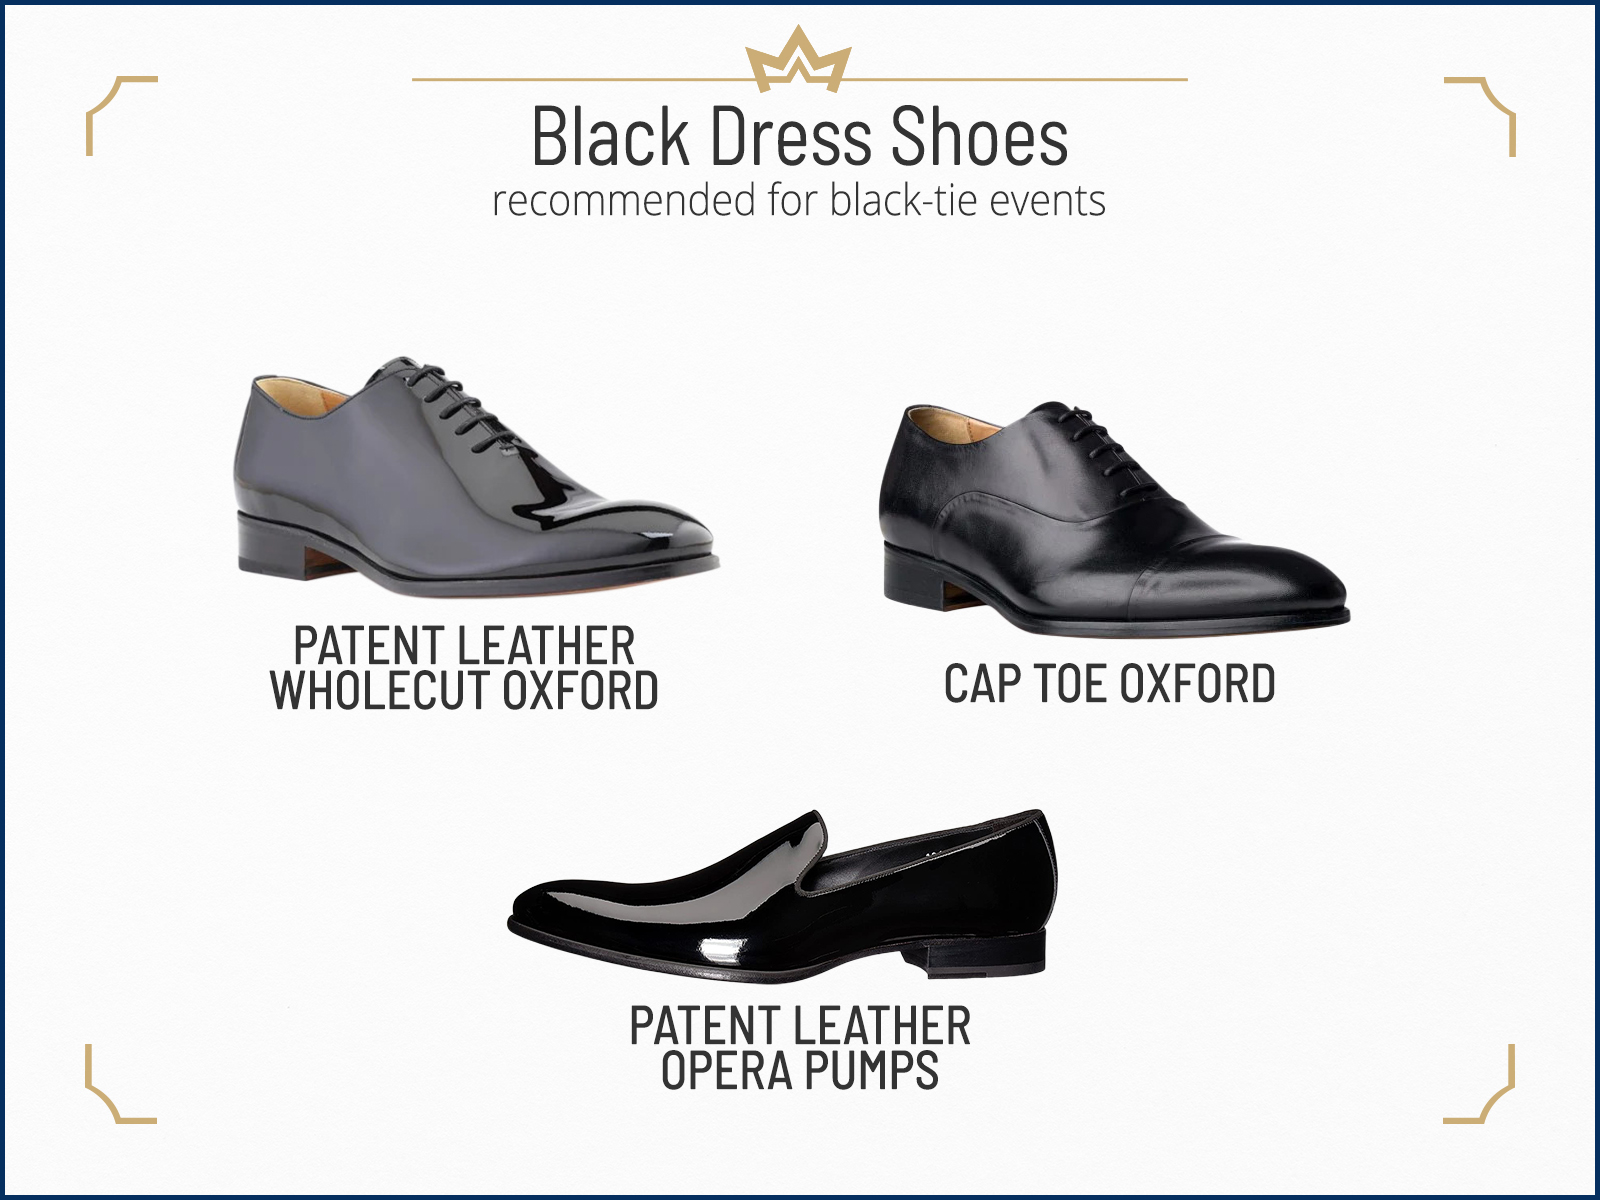 Black formal footwer to wear for black-tie events